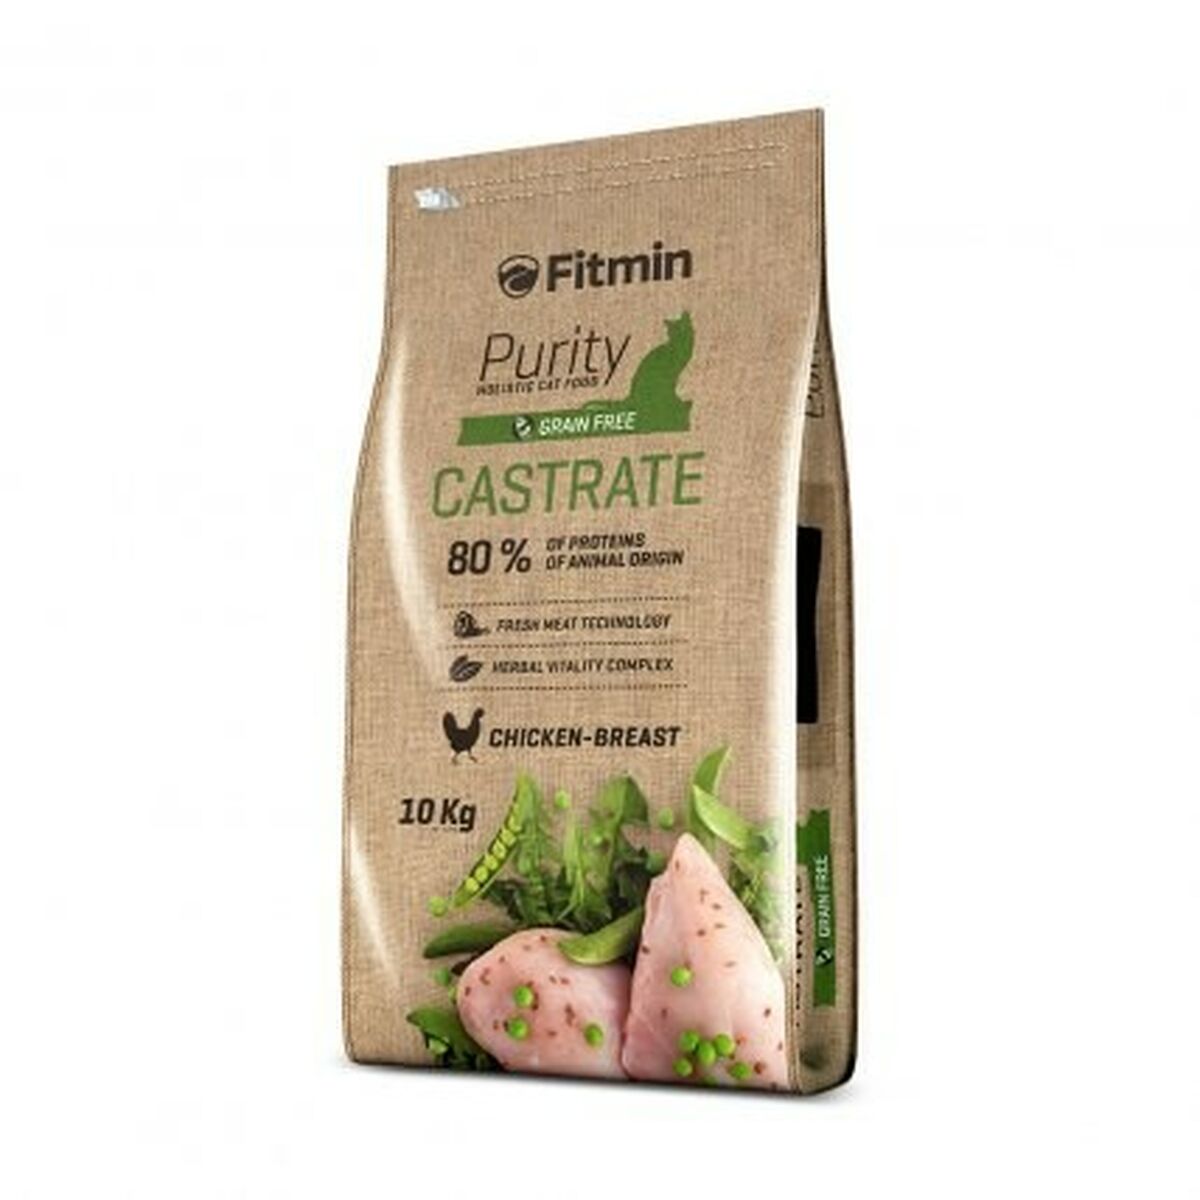 Aliments pour chat Fitmin Purity Castrate Adulte 10 kg